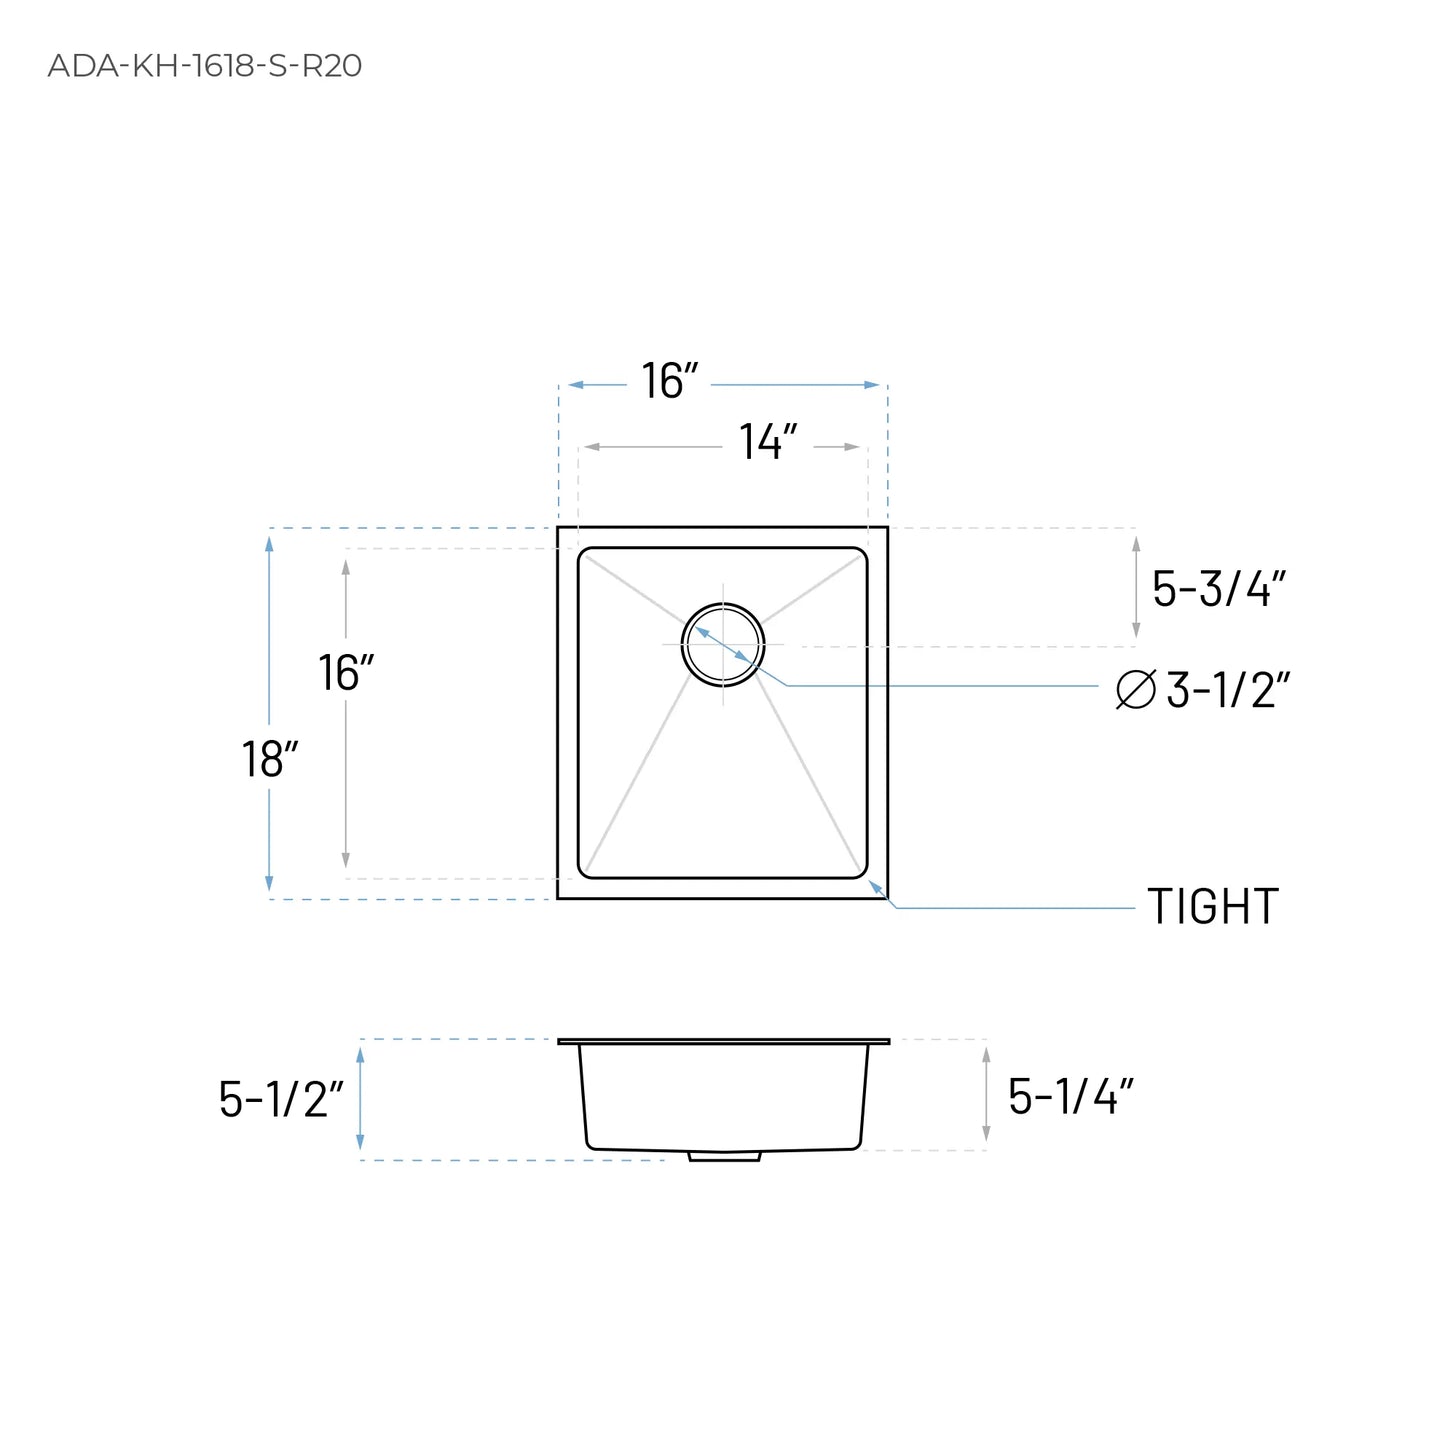 Technical Drawing of ADA Stainless Steel Kitchen Sink